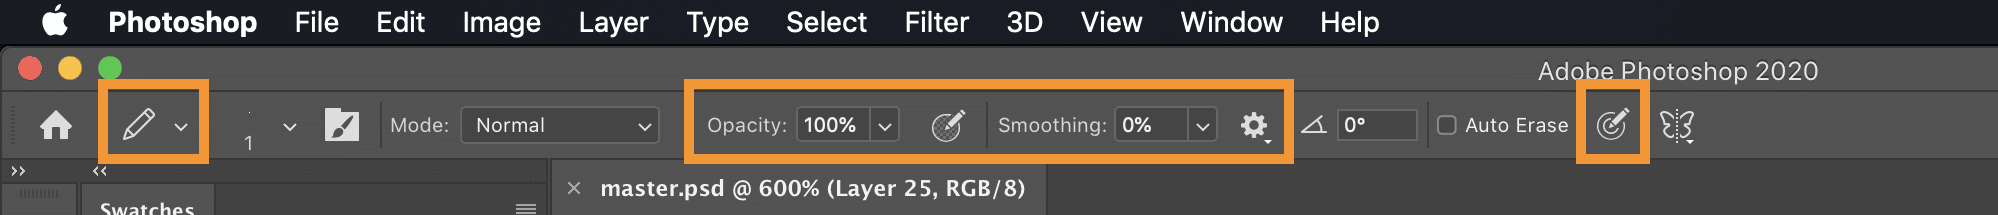 Screenshot of the Photoshop toolbar highlighting which settings need to be changed for the brush or pencil tool in order to draw pixel-perfect strokes without smoothing or anti-aliasing.